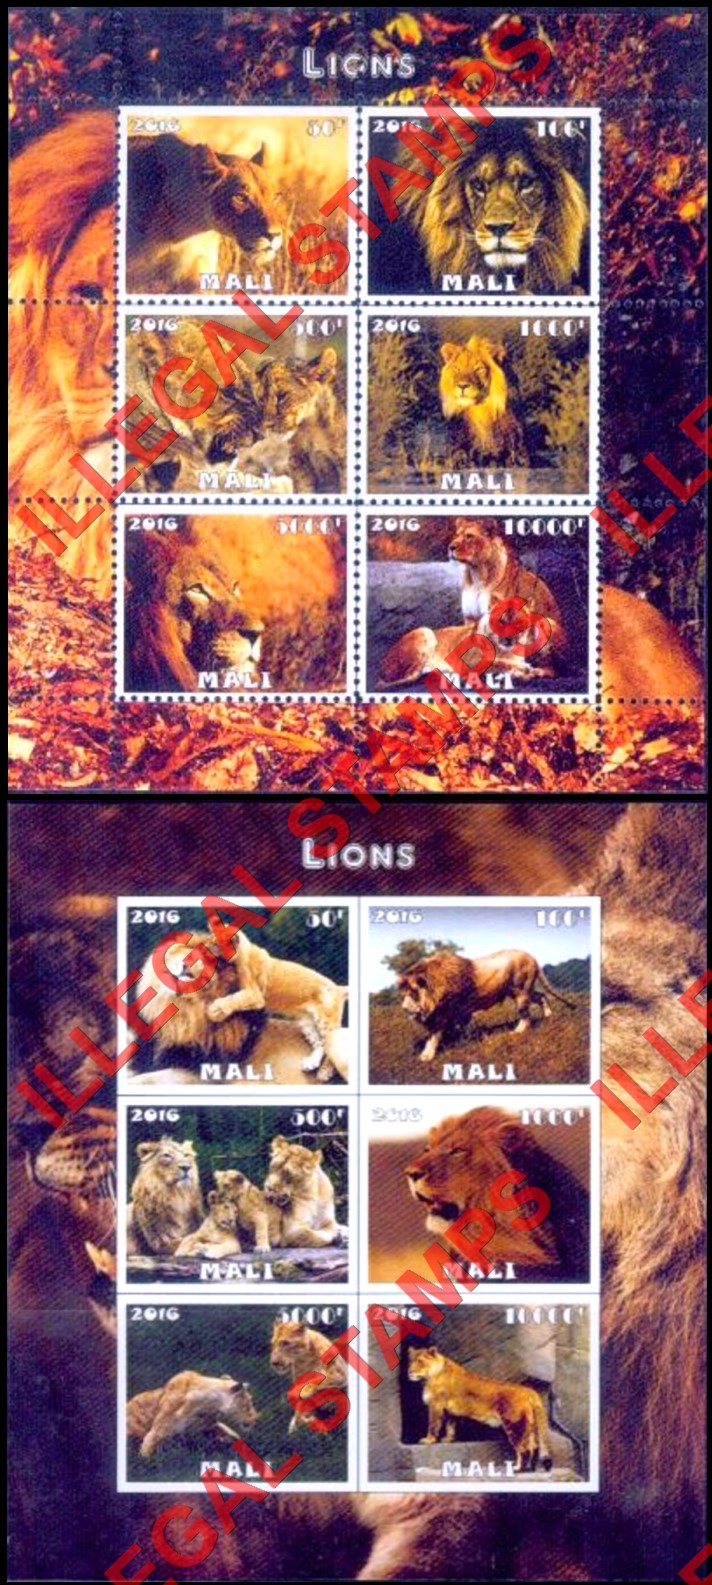 Mali 2016 Lions Illegal Stamp Souvenir Sheets of 6 (Part 1)